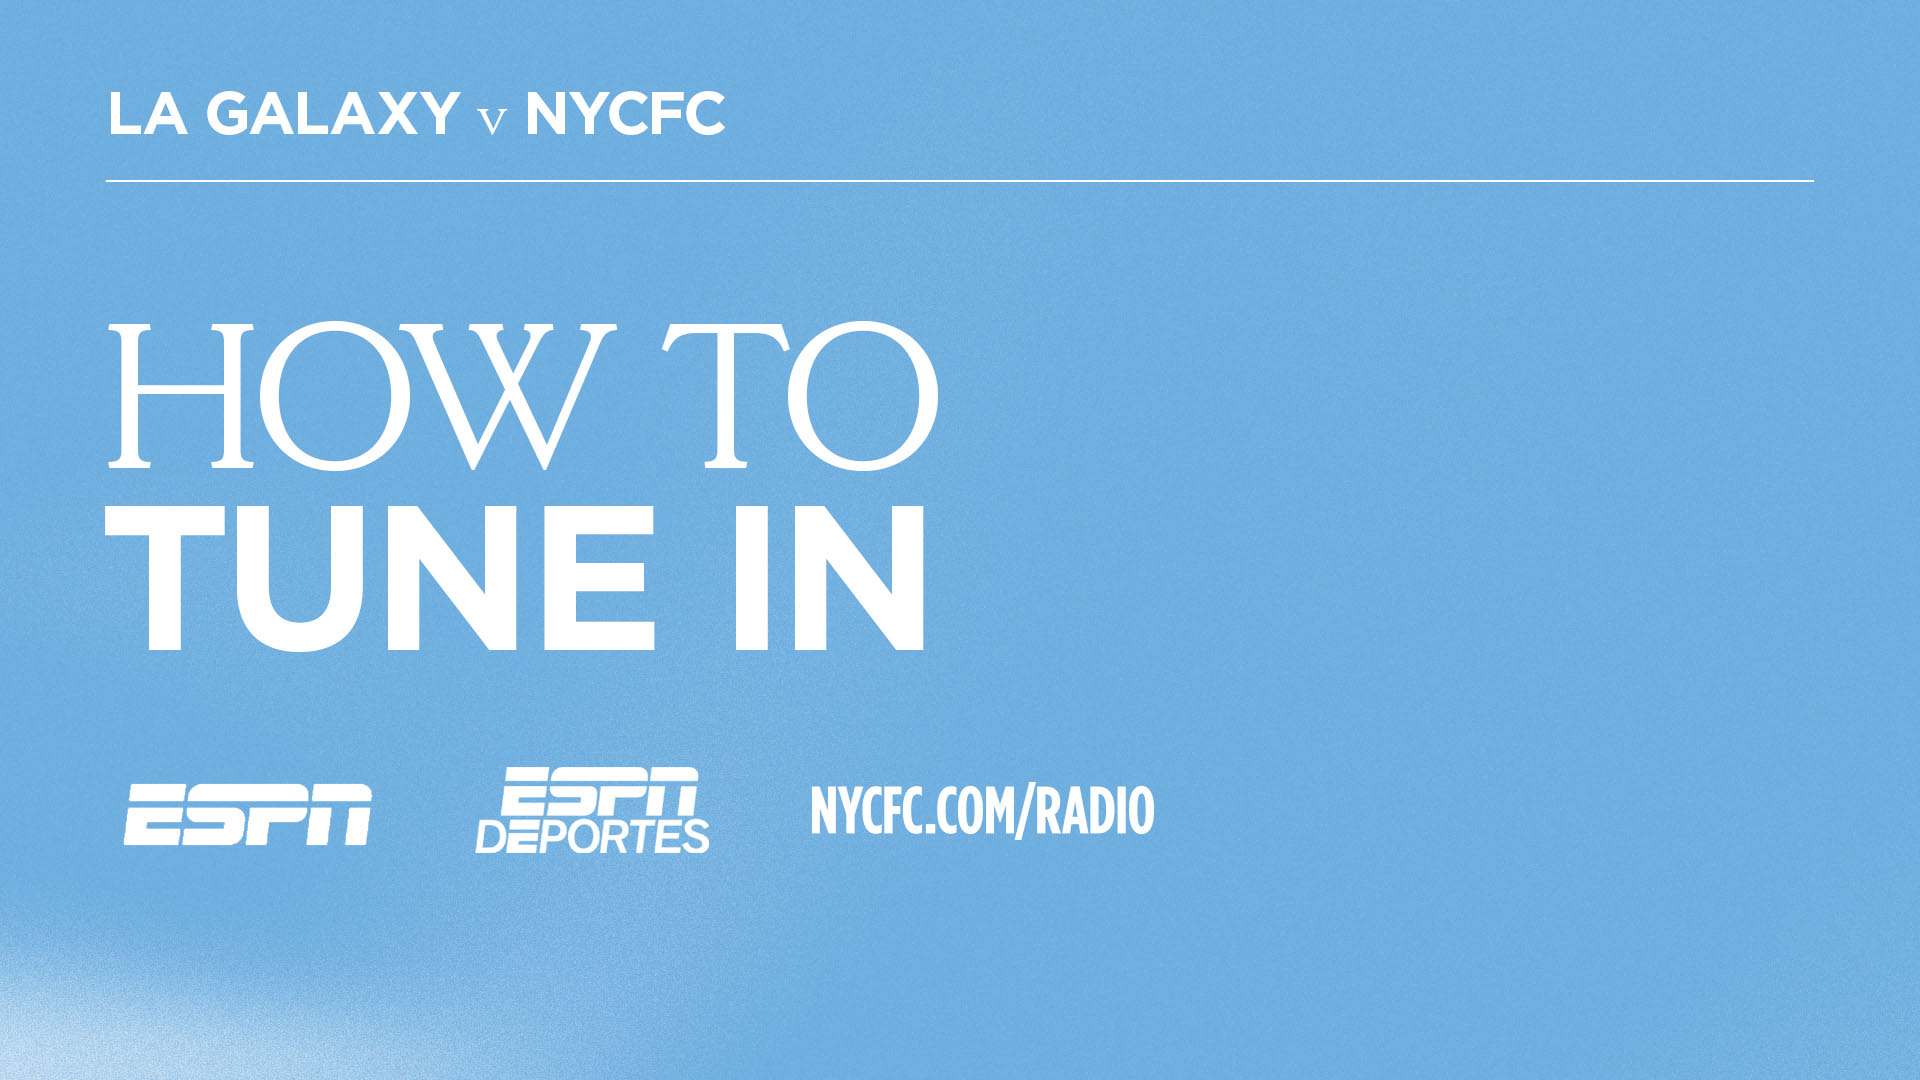 How to watch and listen to the LA Galaxy vs NYCFC match